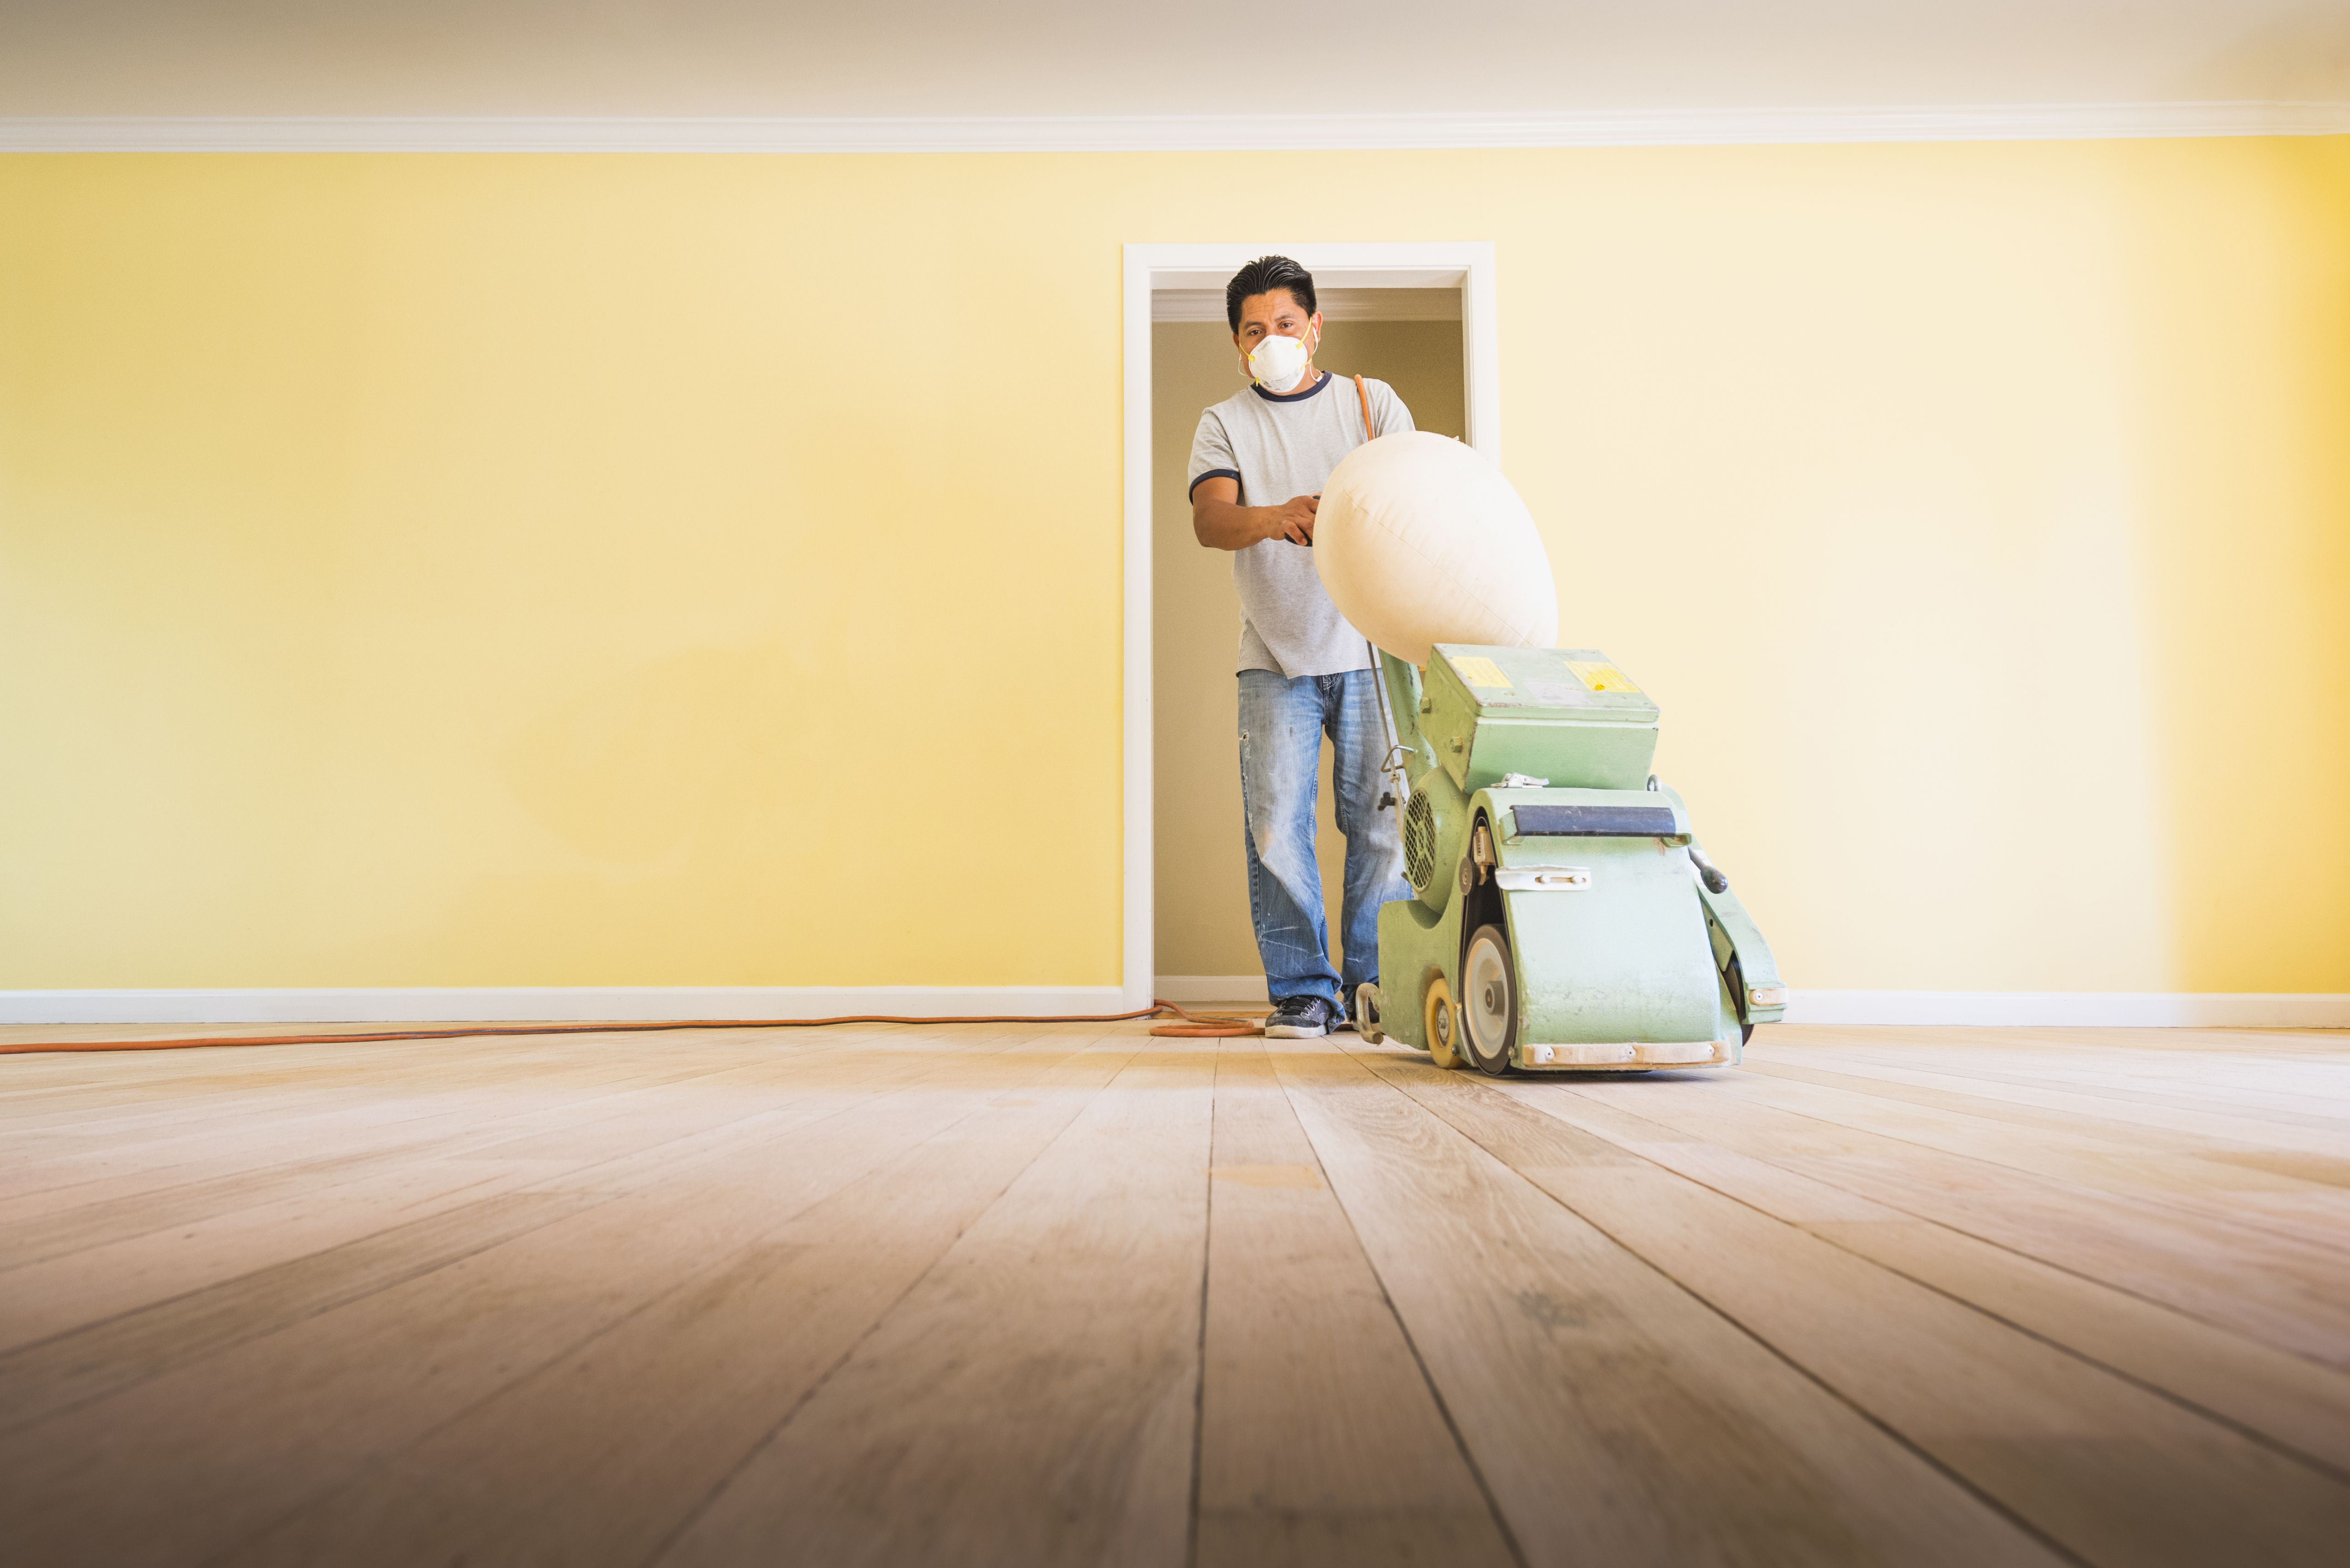 29 Lovable Screening Hardwood Floors Cost 2024 free download screening hardwood floors cost of should you paint walls or refinish floors first intended for floorsandingafterpainting 5a8f08dfae9ab80037d9d878